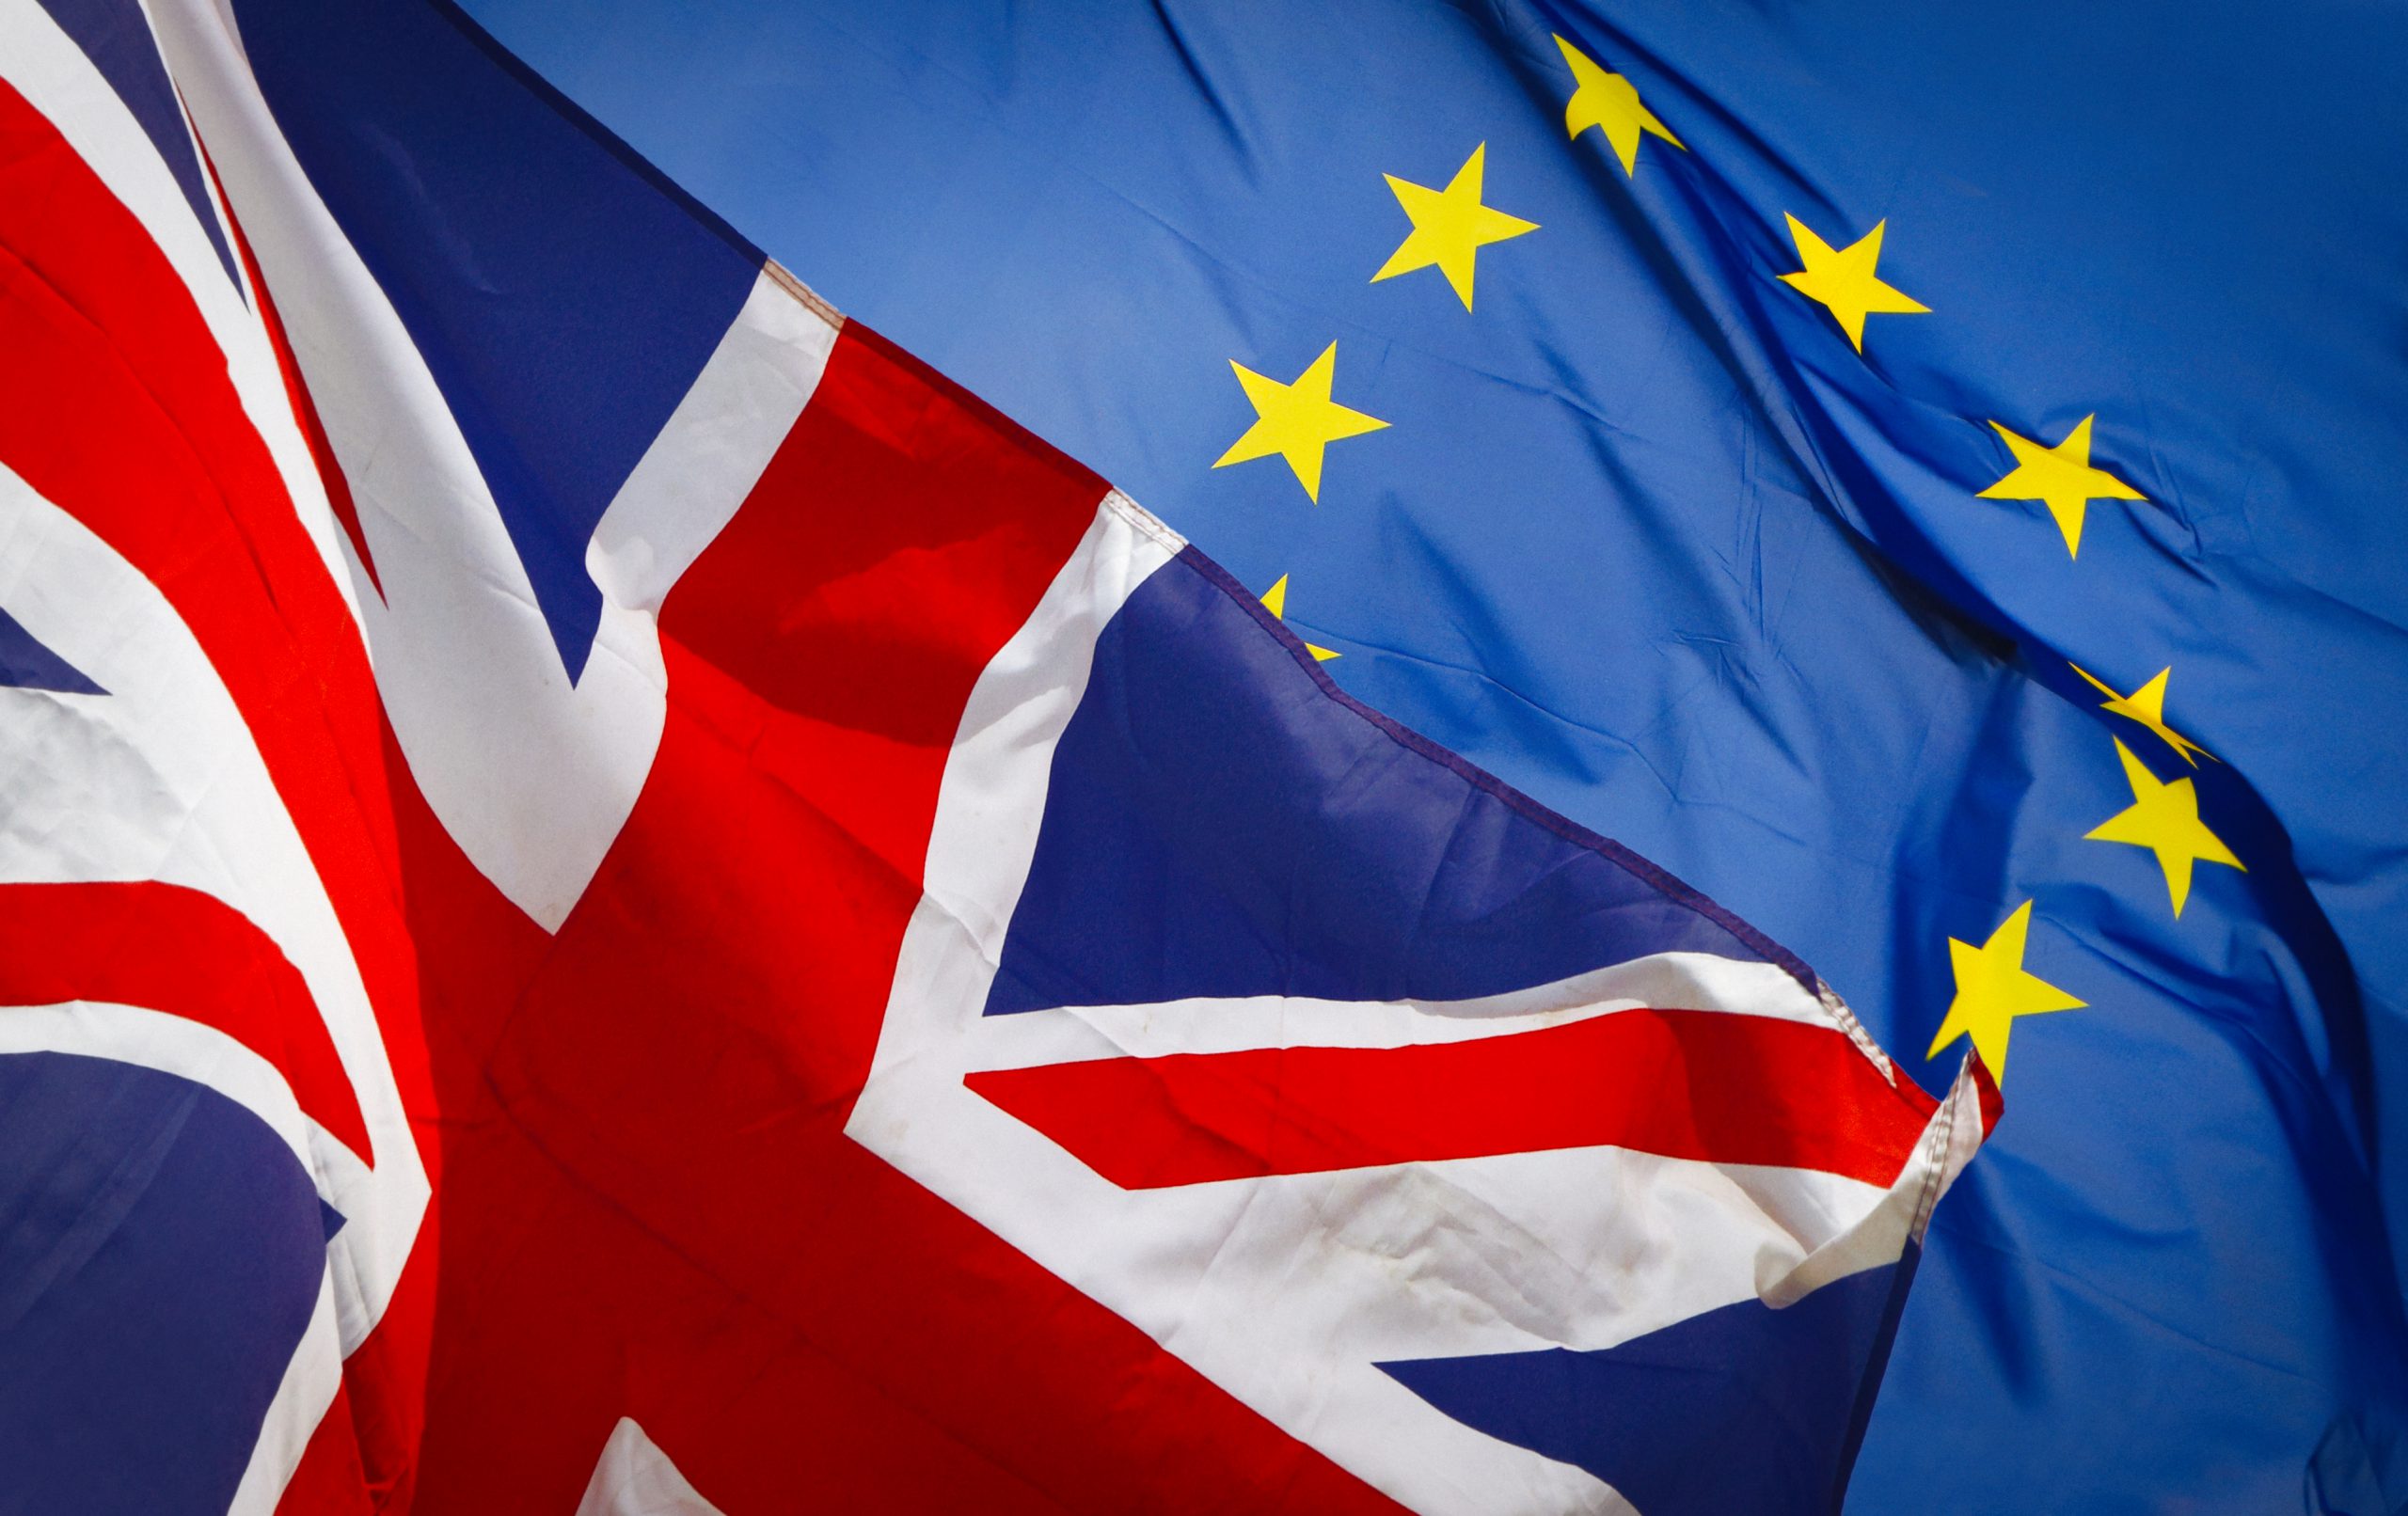 How Can Small Businesses Get Ready for Brexit?